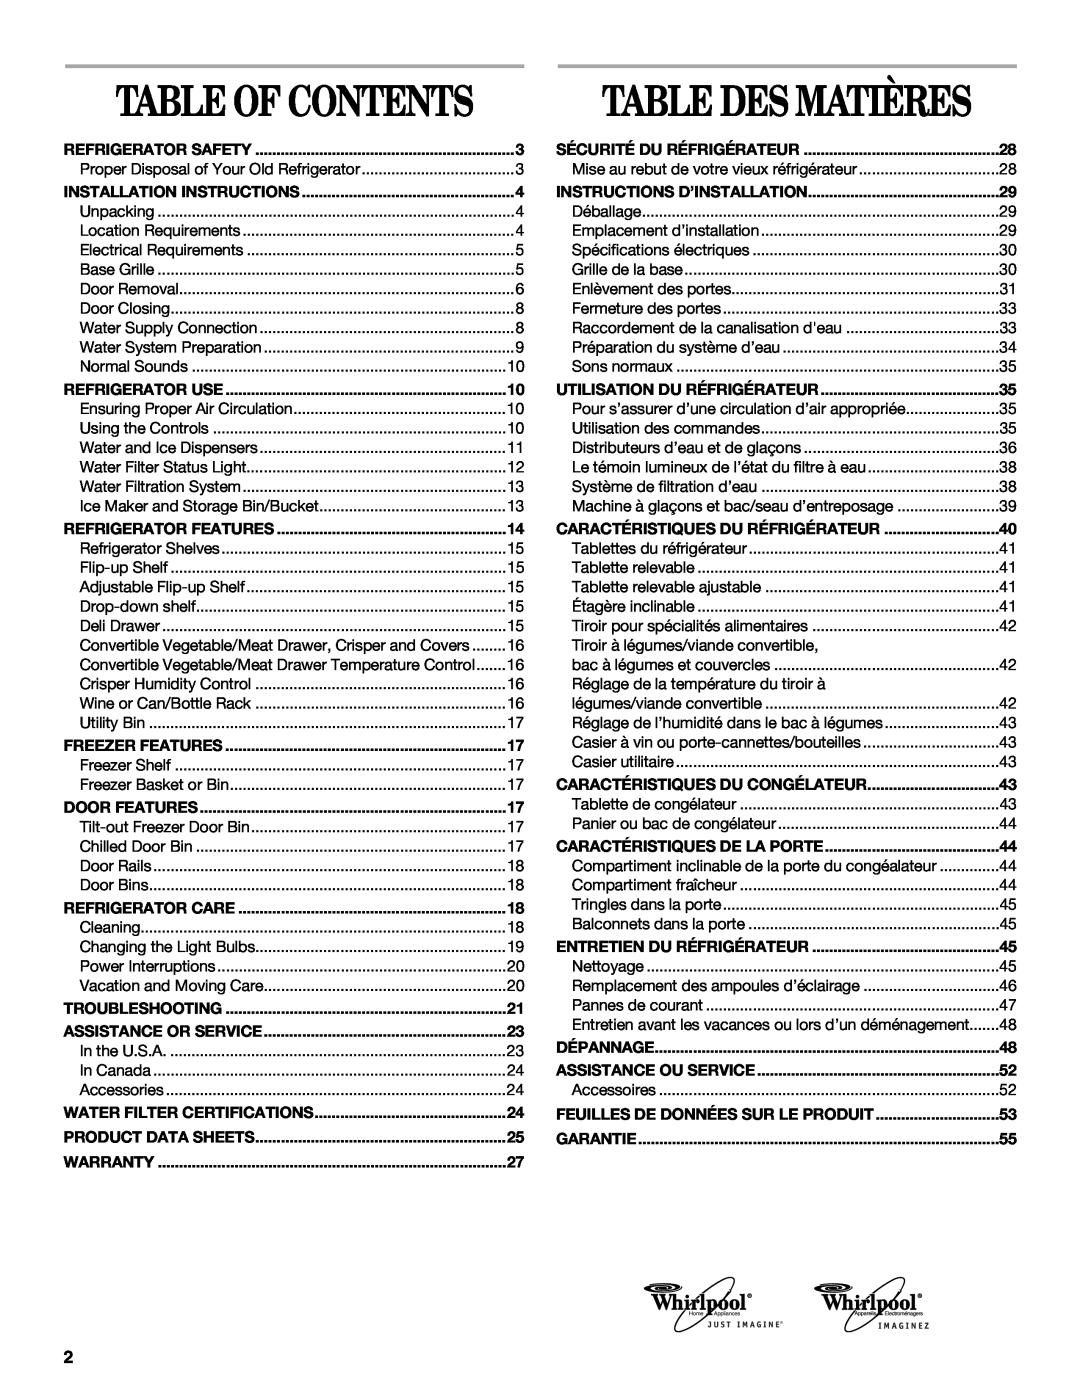 Whirlpool KTLA22EMSS01 Table Des Matières, Table Of Contents, Refrigerator Safety, Installation Instructions, Warranty 